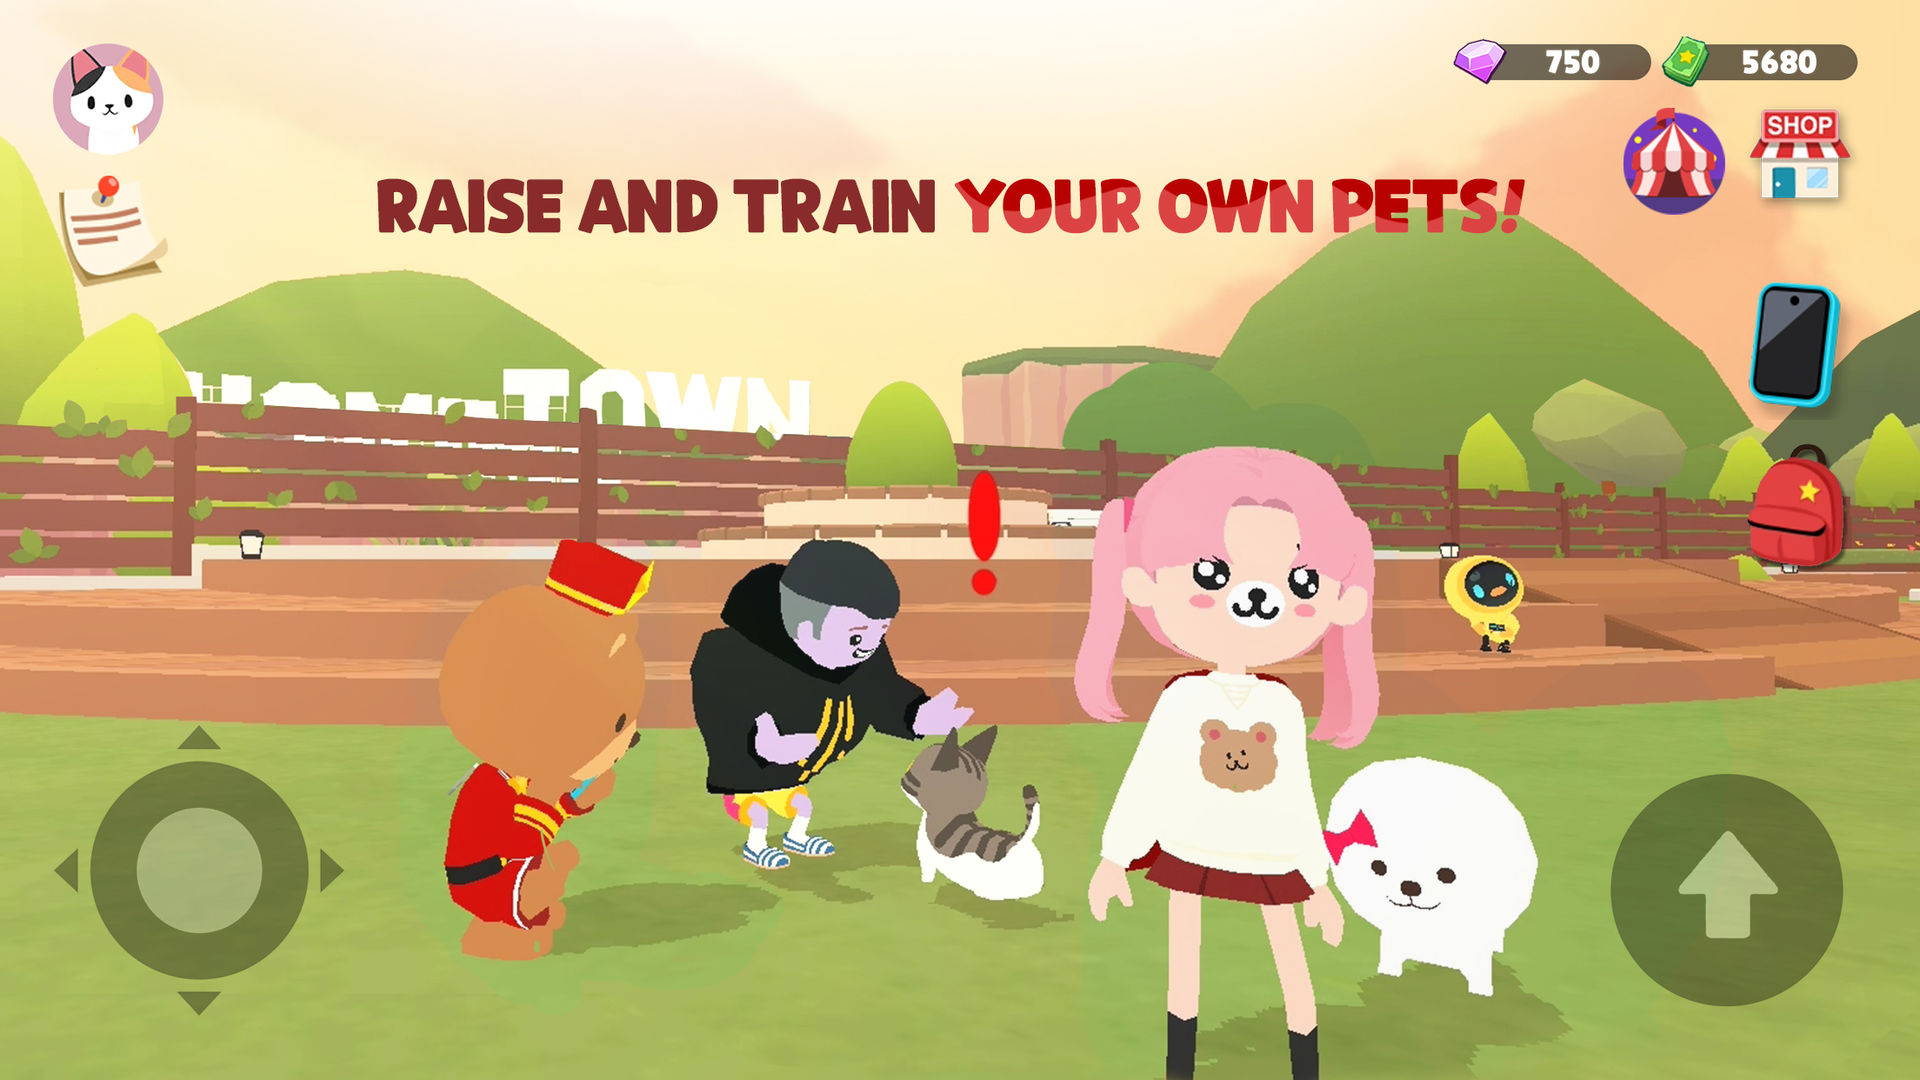 Screenshot of Play Together